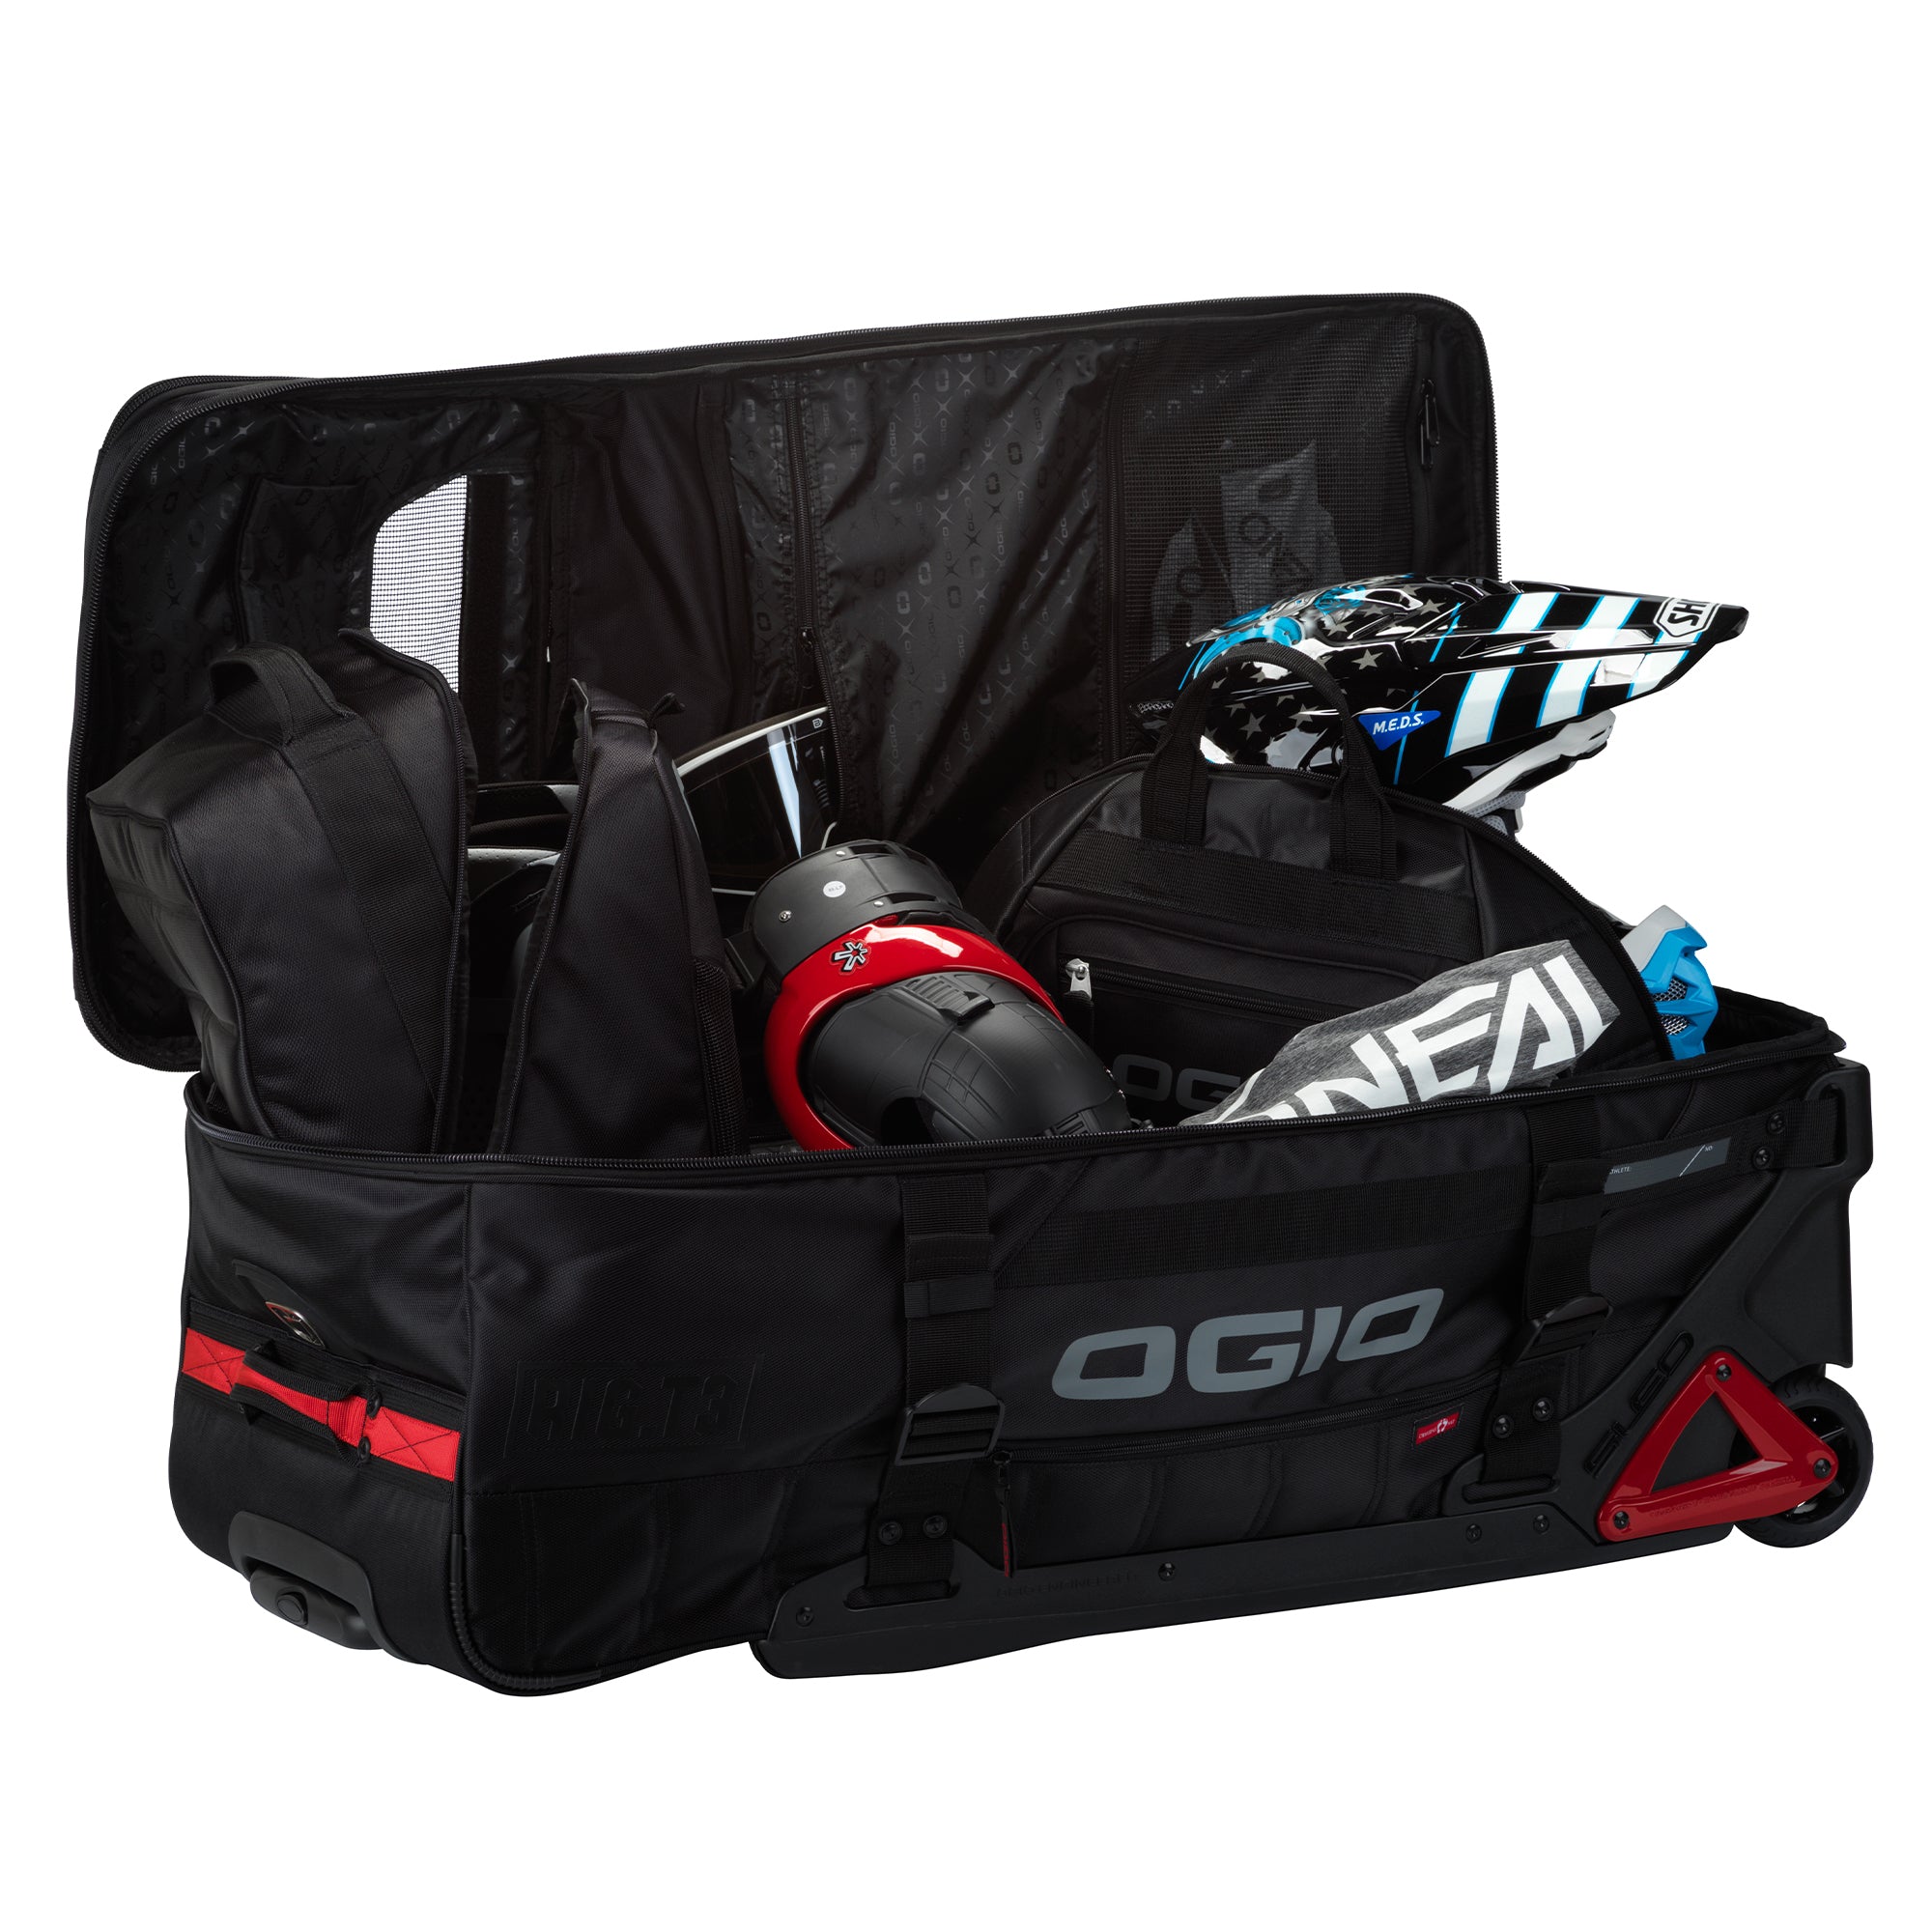 Ogio RIG Travel Gear bag | Clothes and Accessories MOTUL